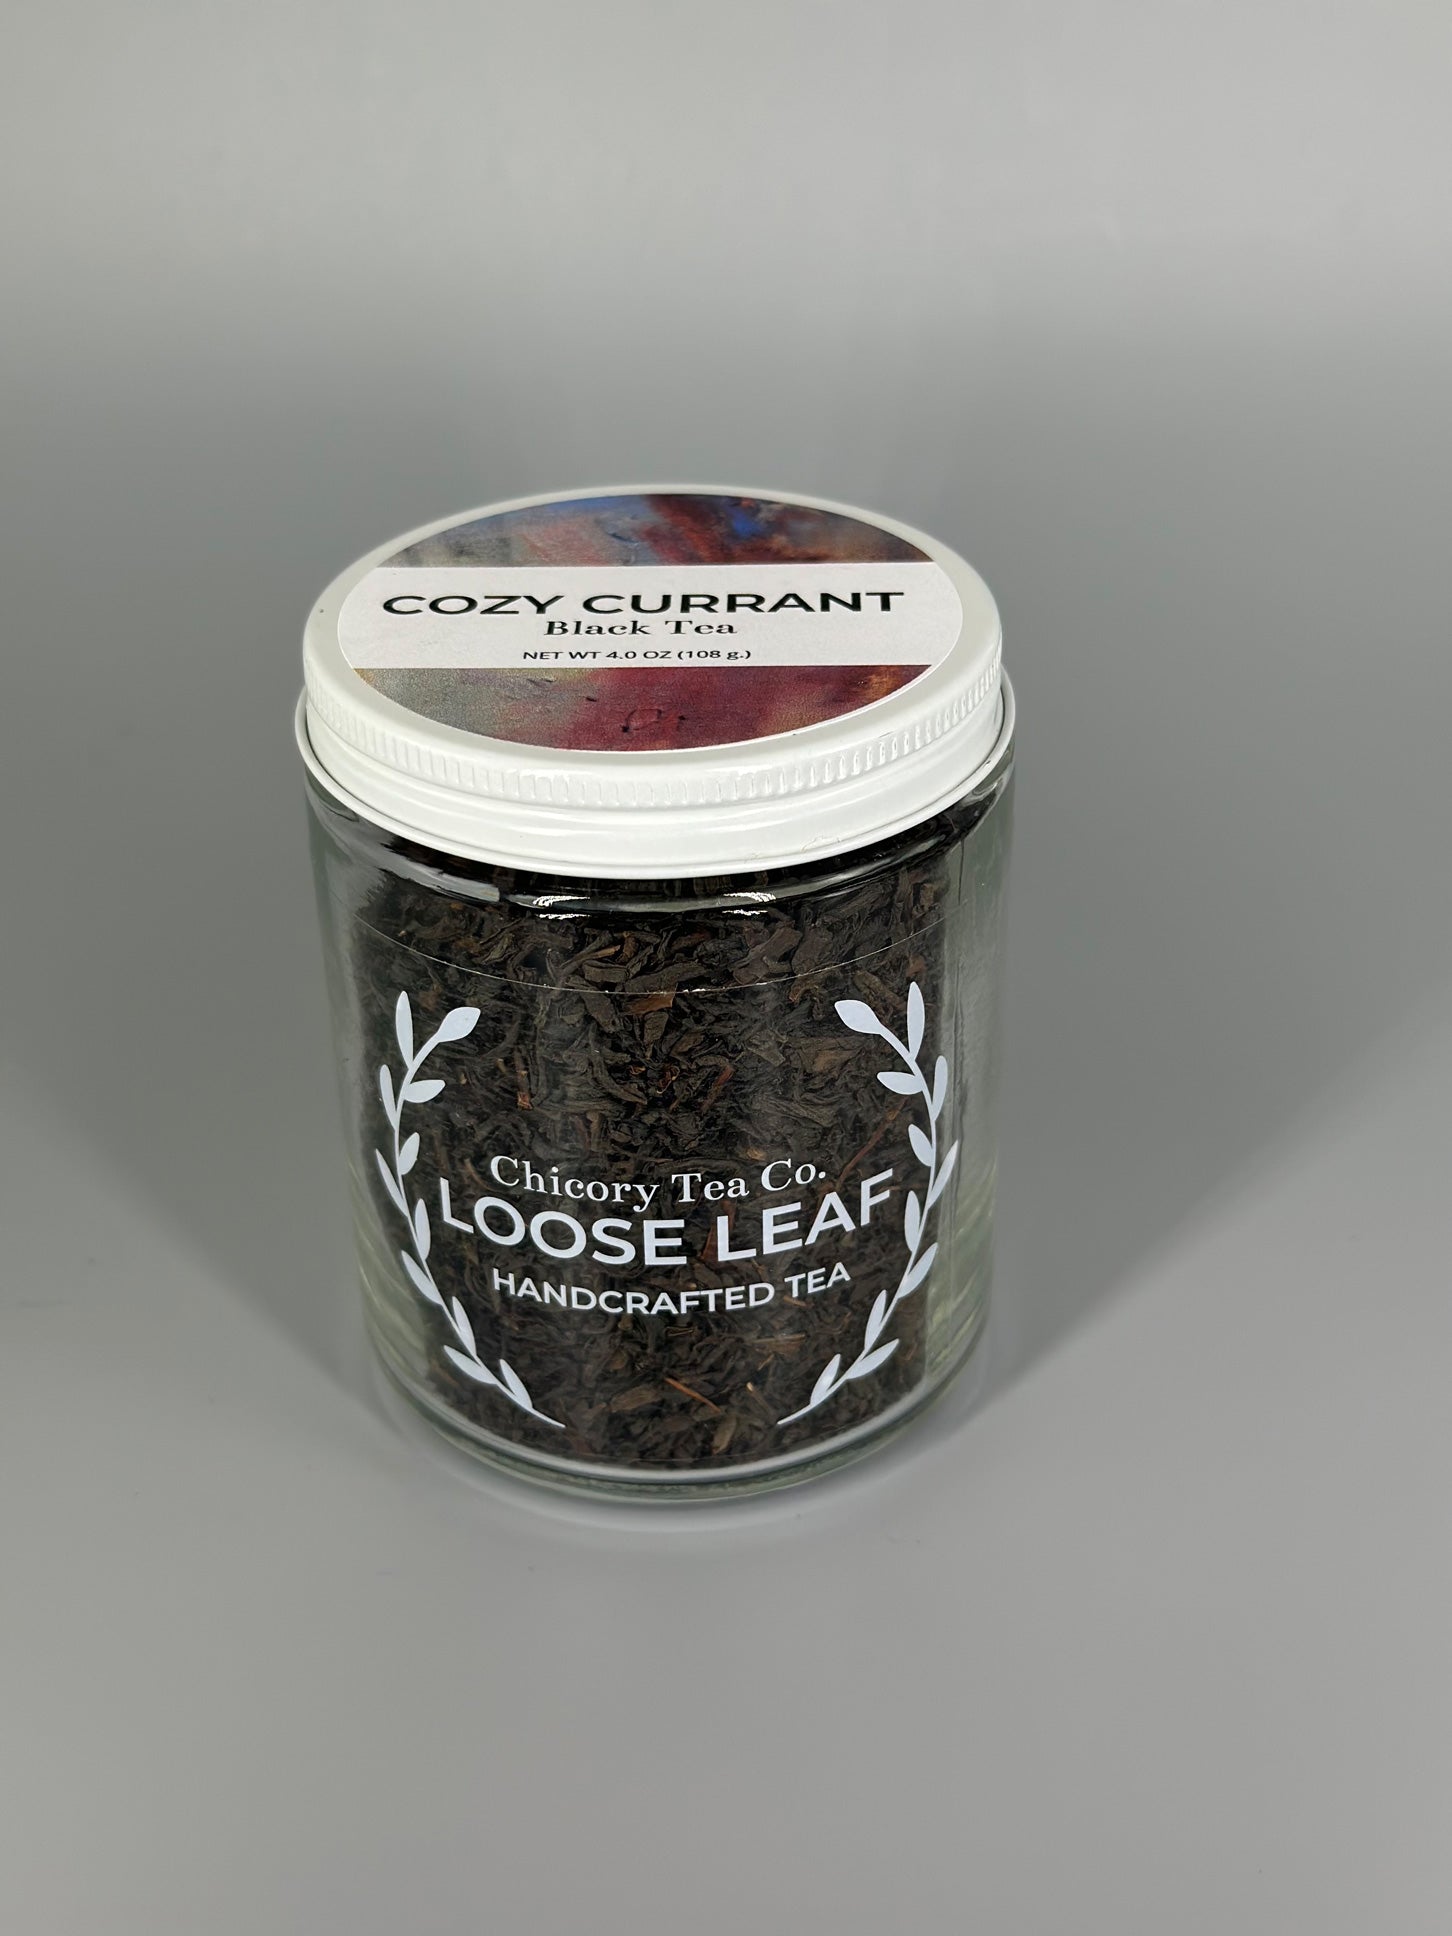 Chicory Tea Co.'s Cozy Currant in the jar, view from the front